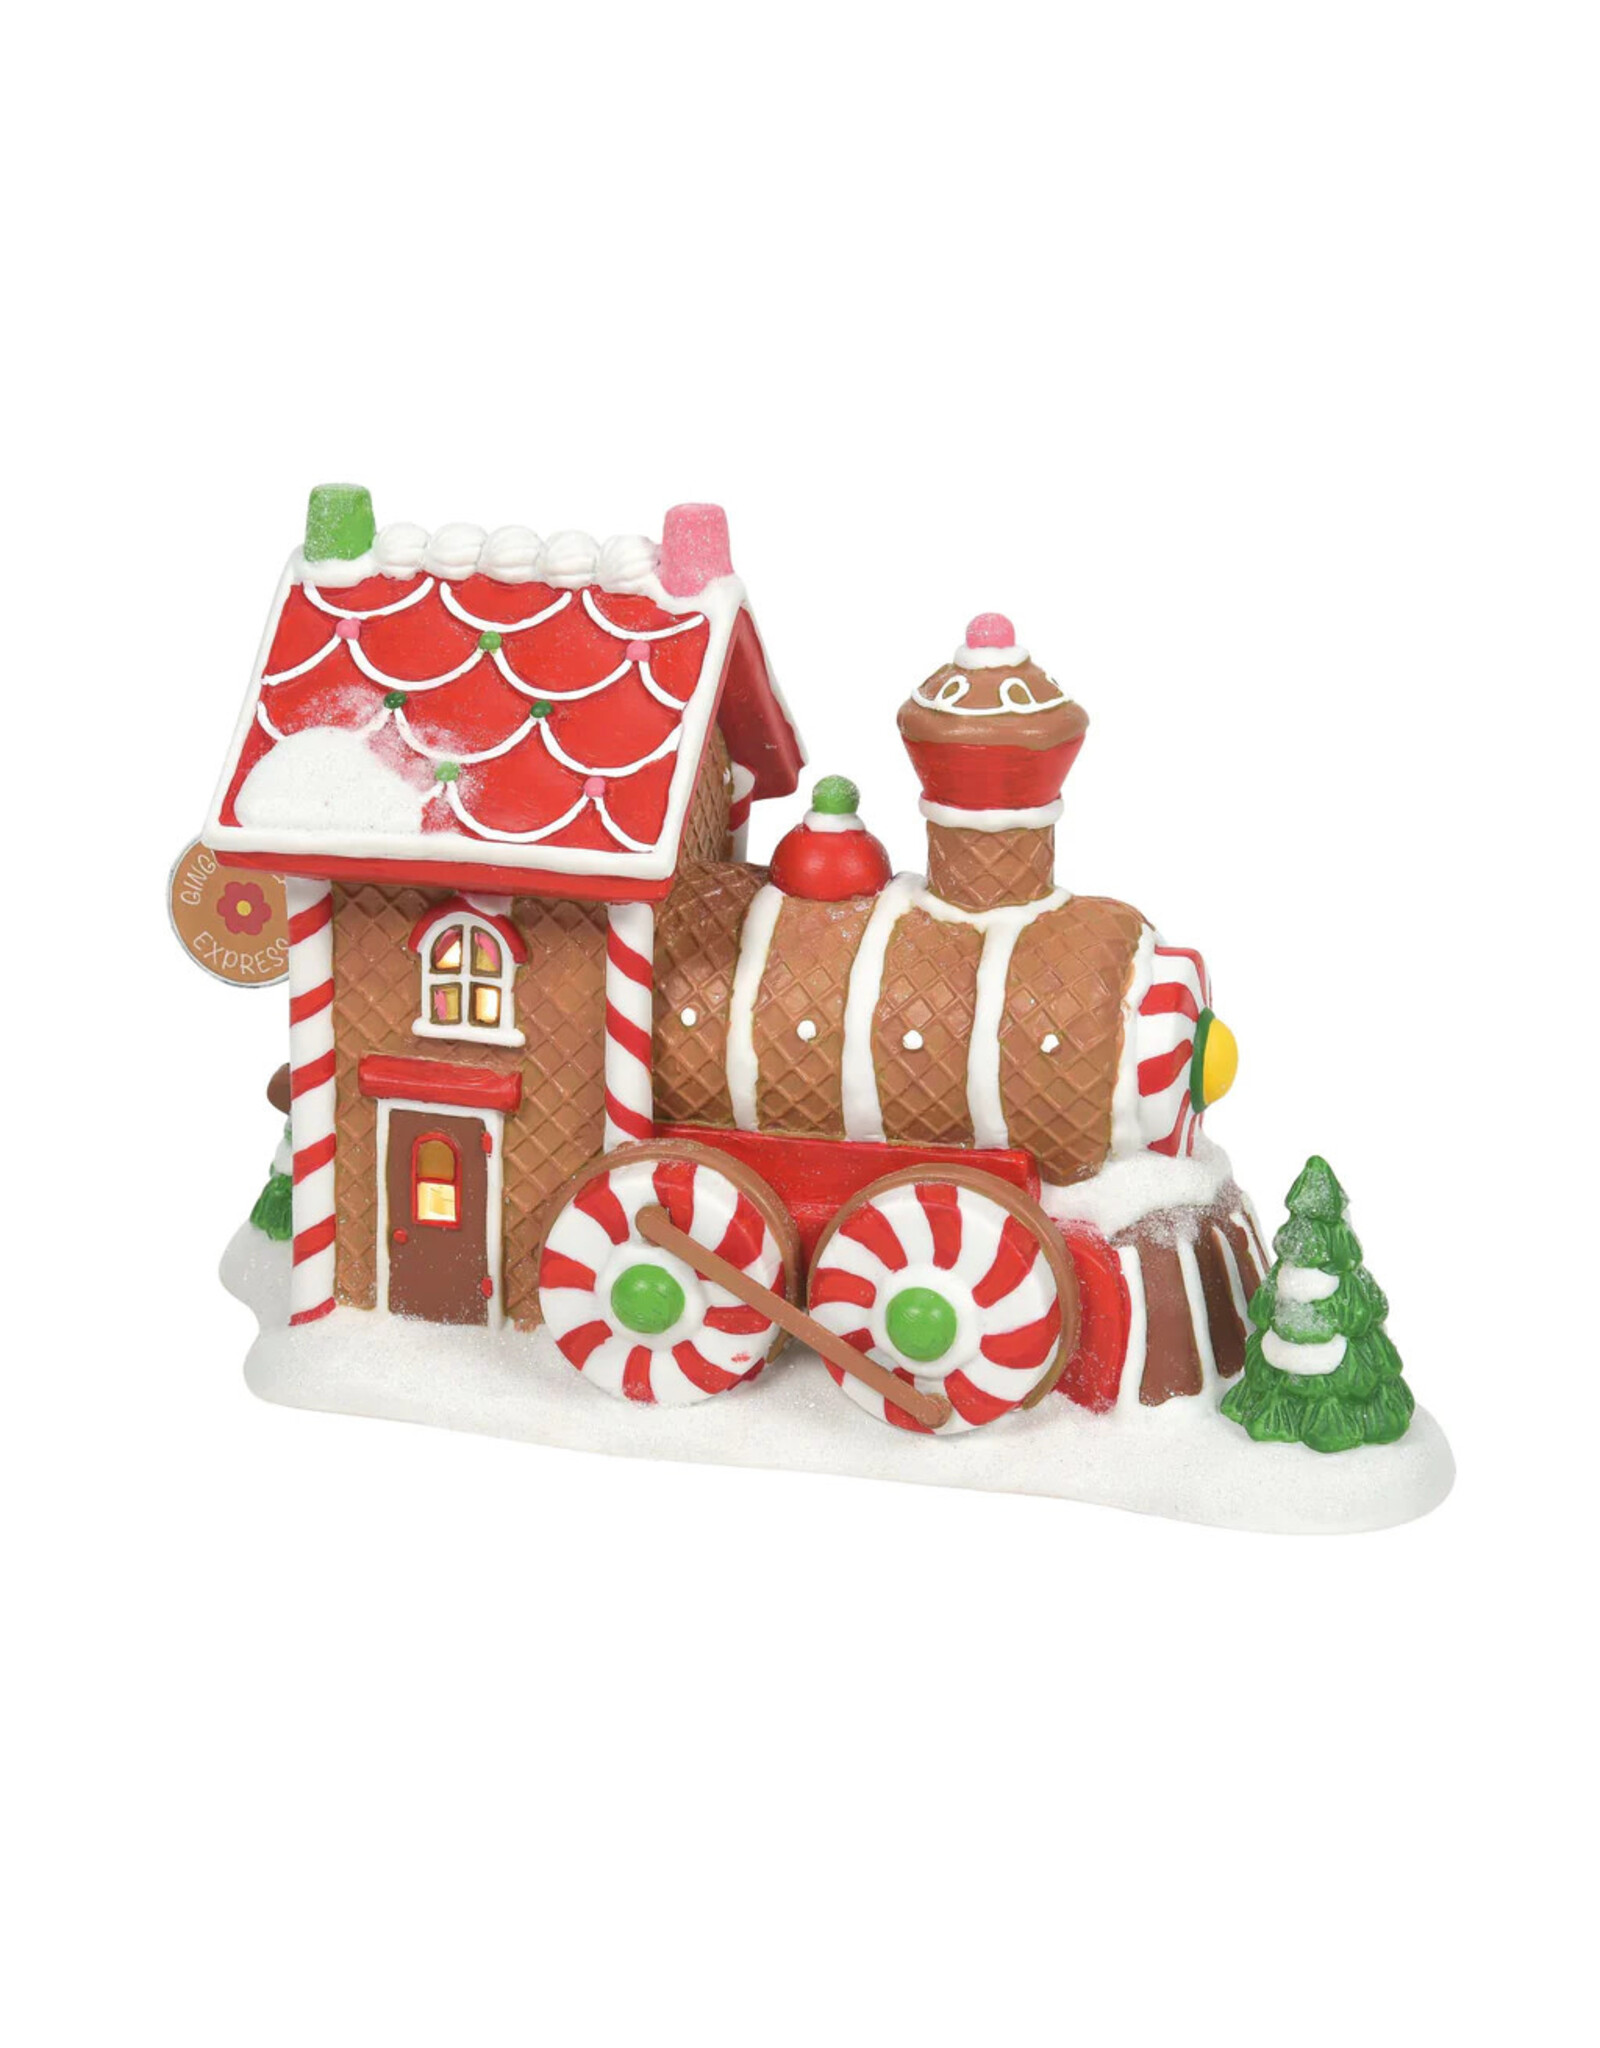 Department 56 Gingerbread Supply Company